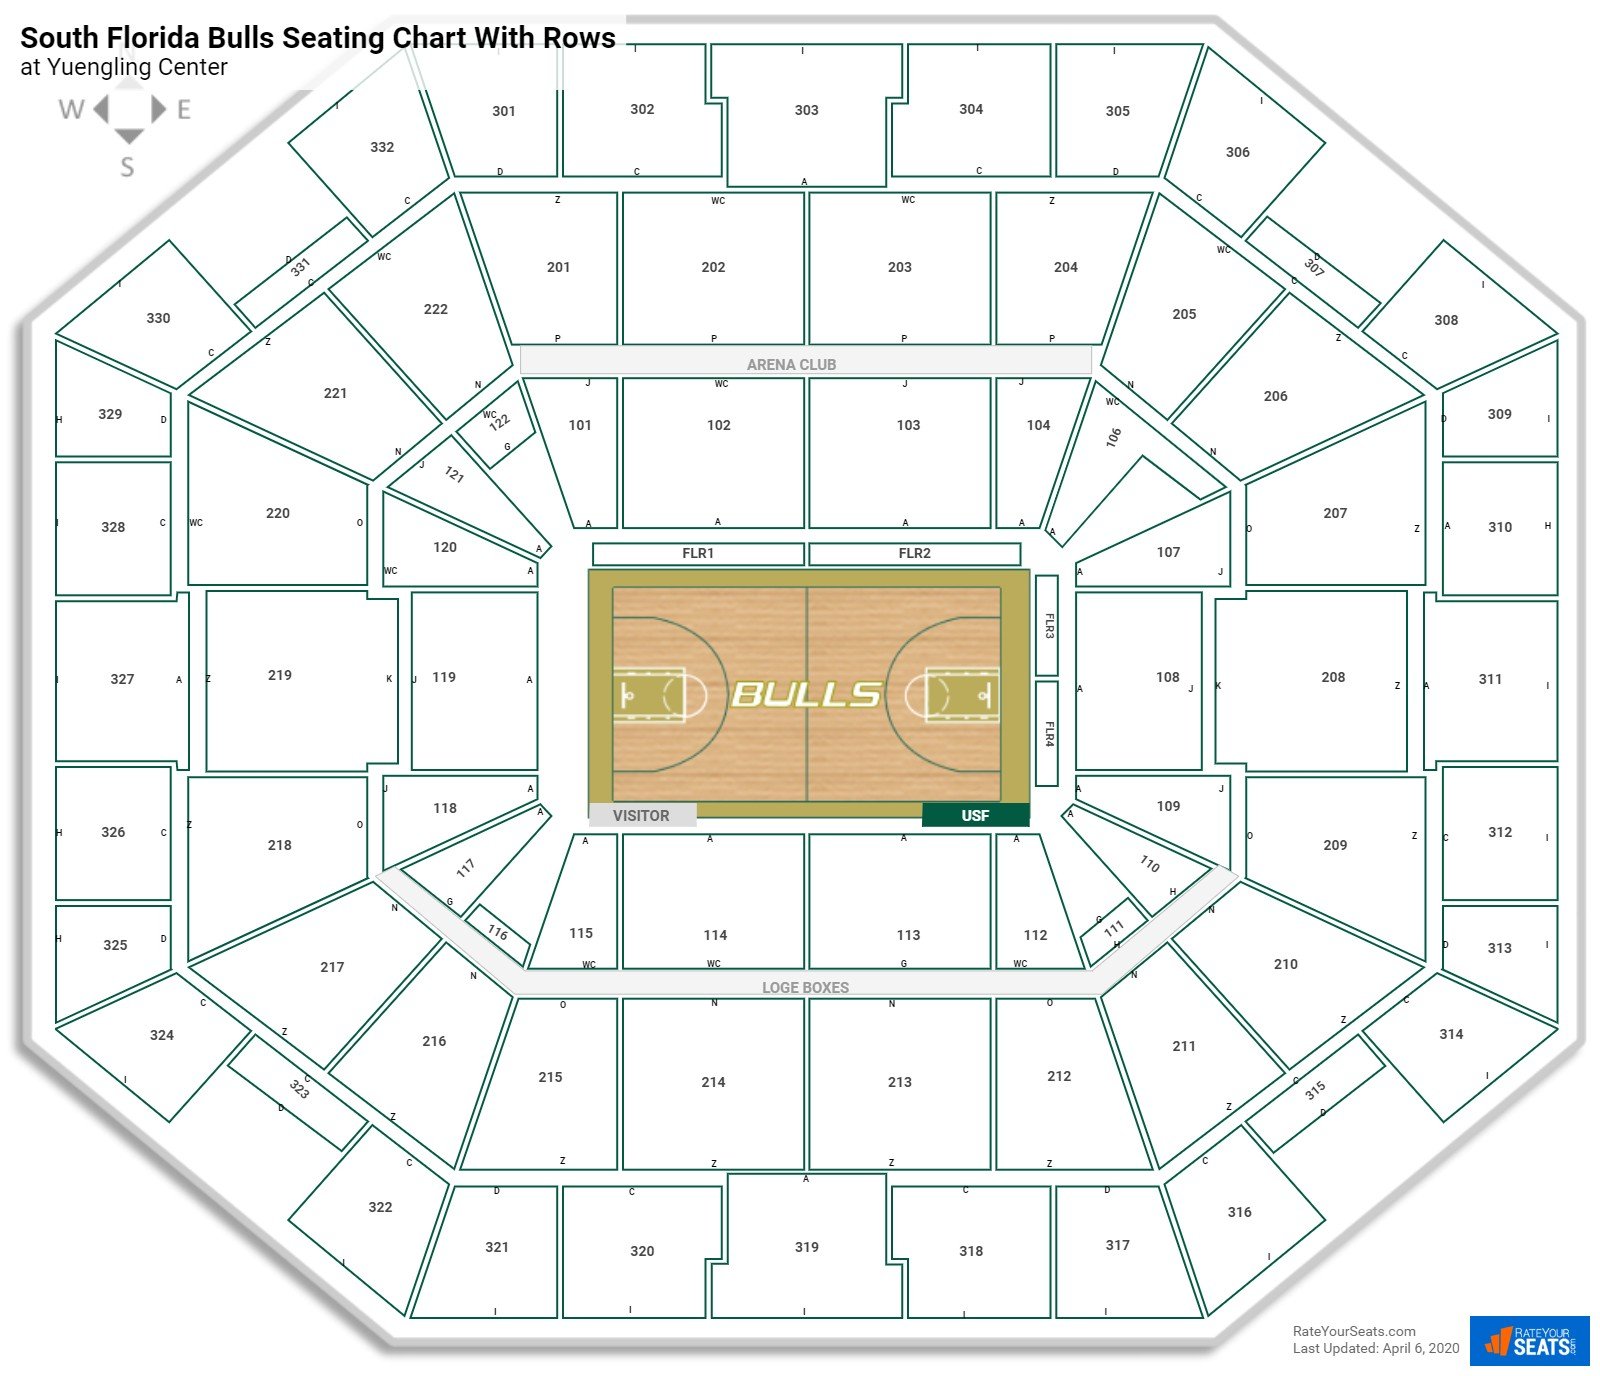 Yuengling Center seating chart with row numbers